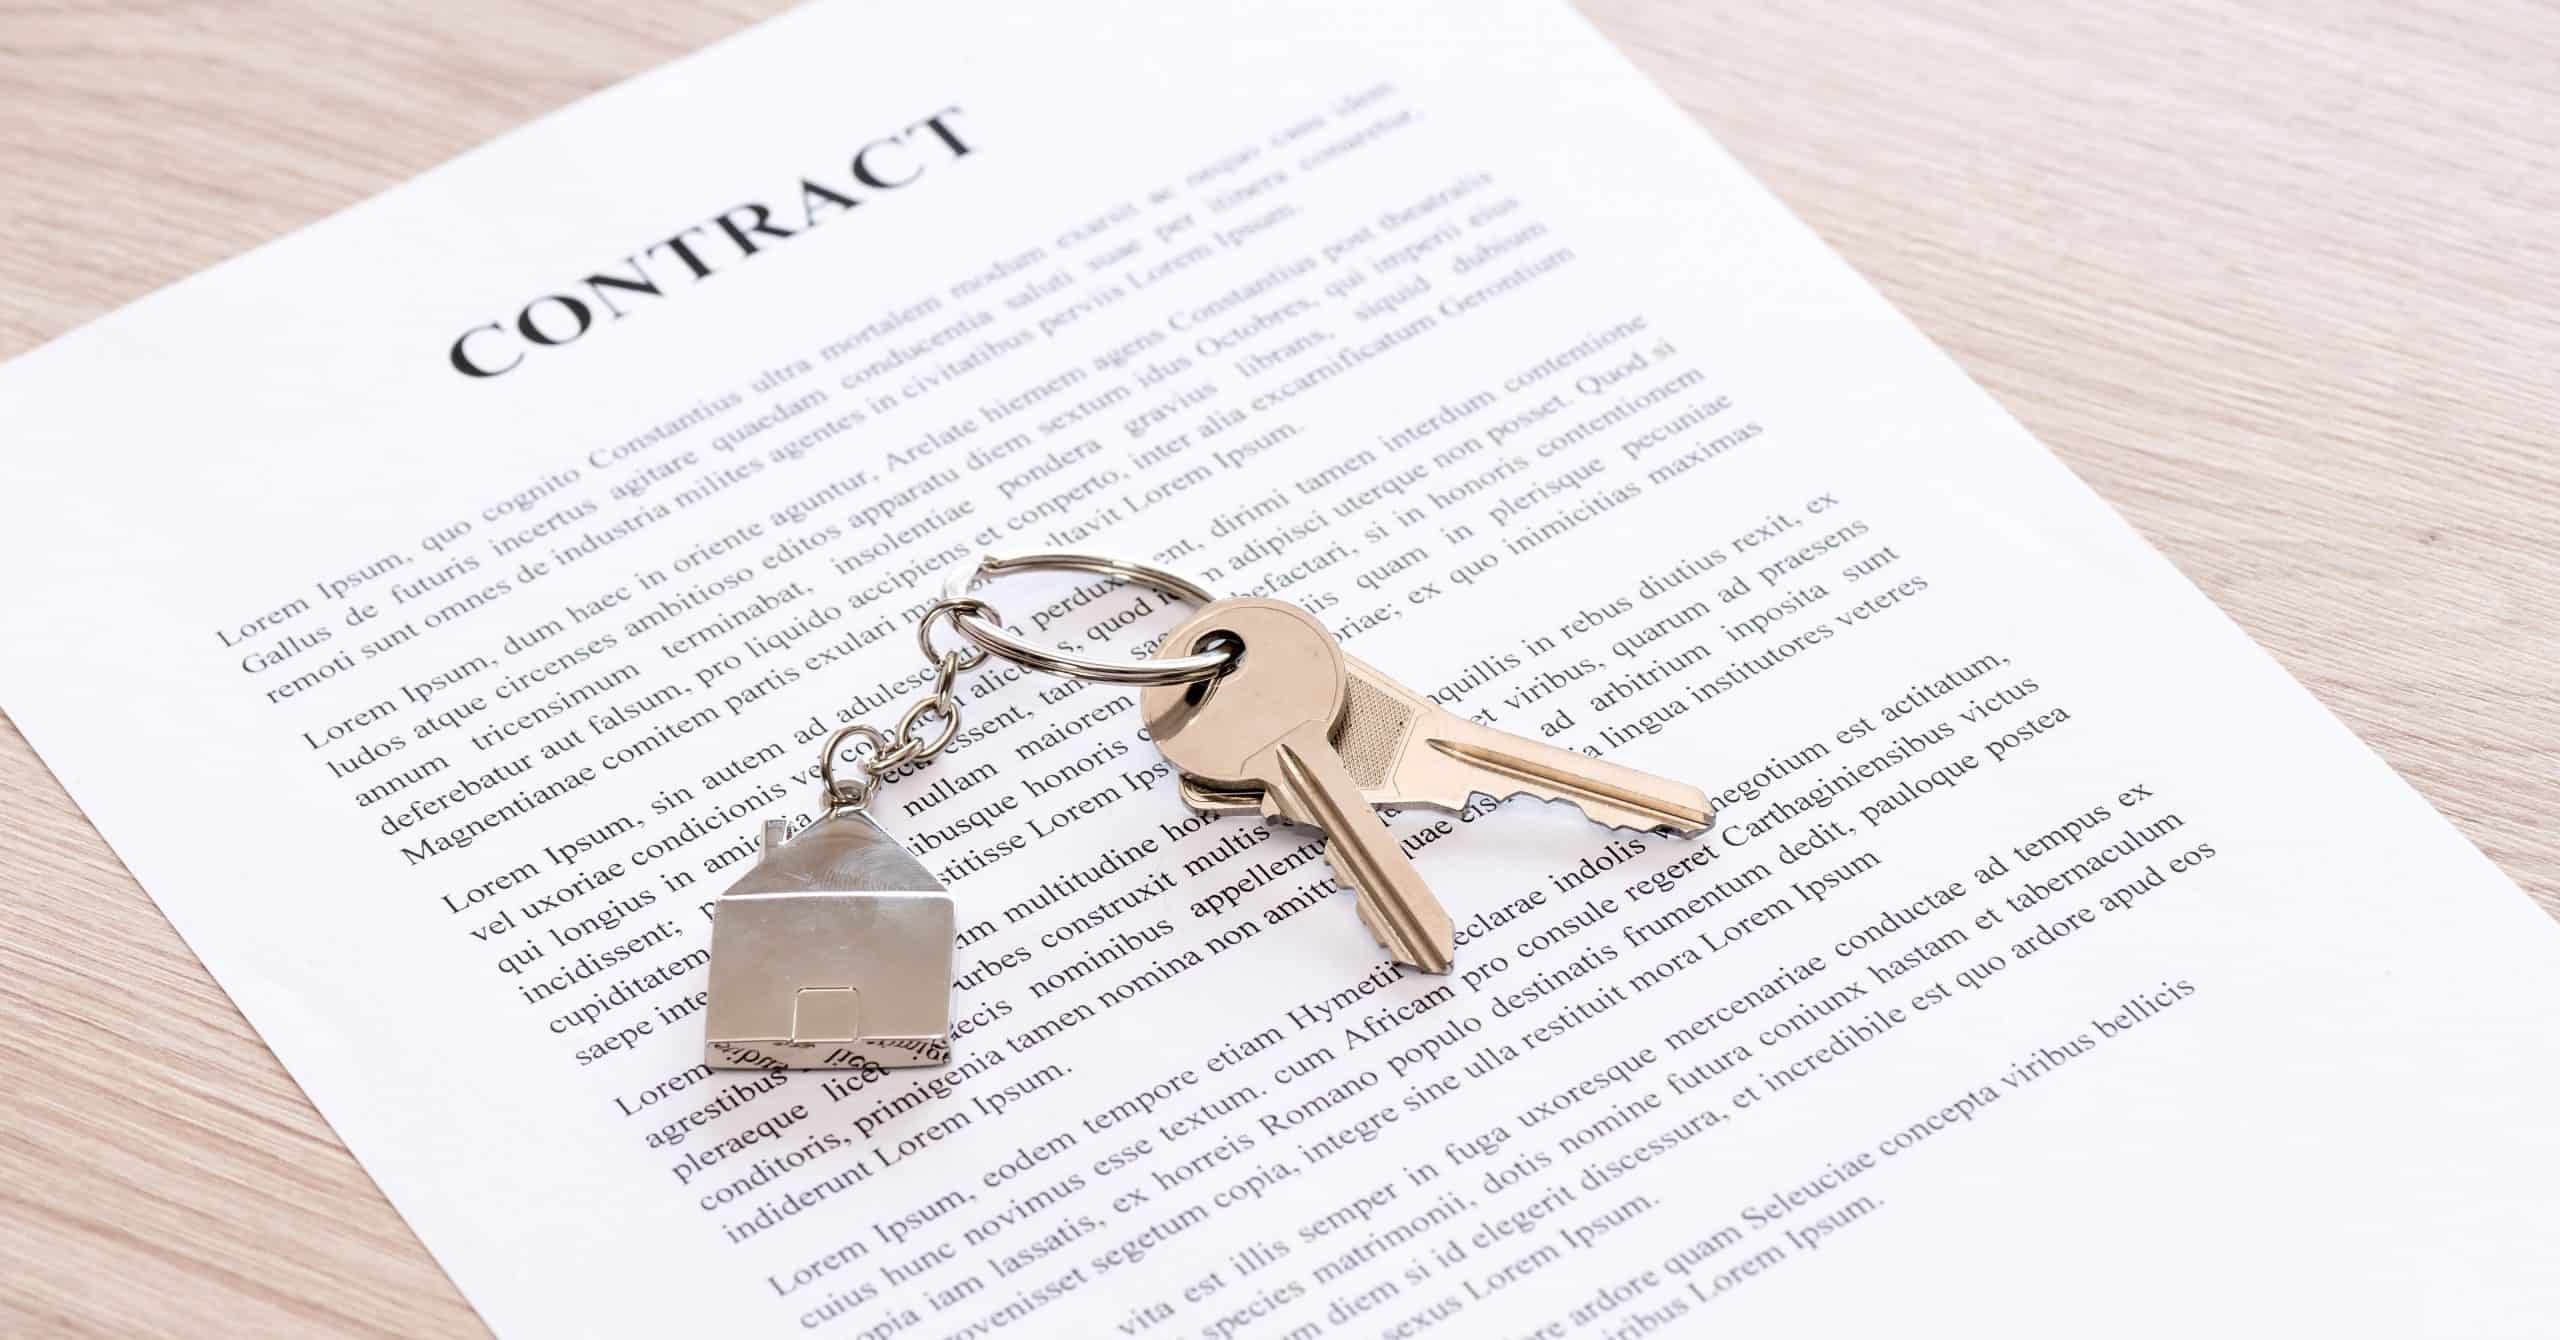 Contract and keys on a house key ring signifying a home rental opportunity.